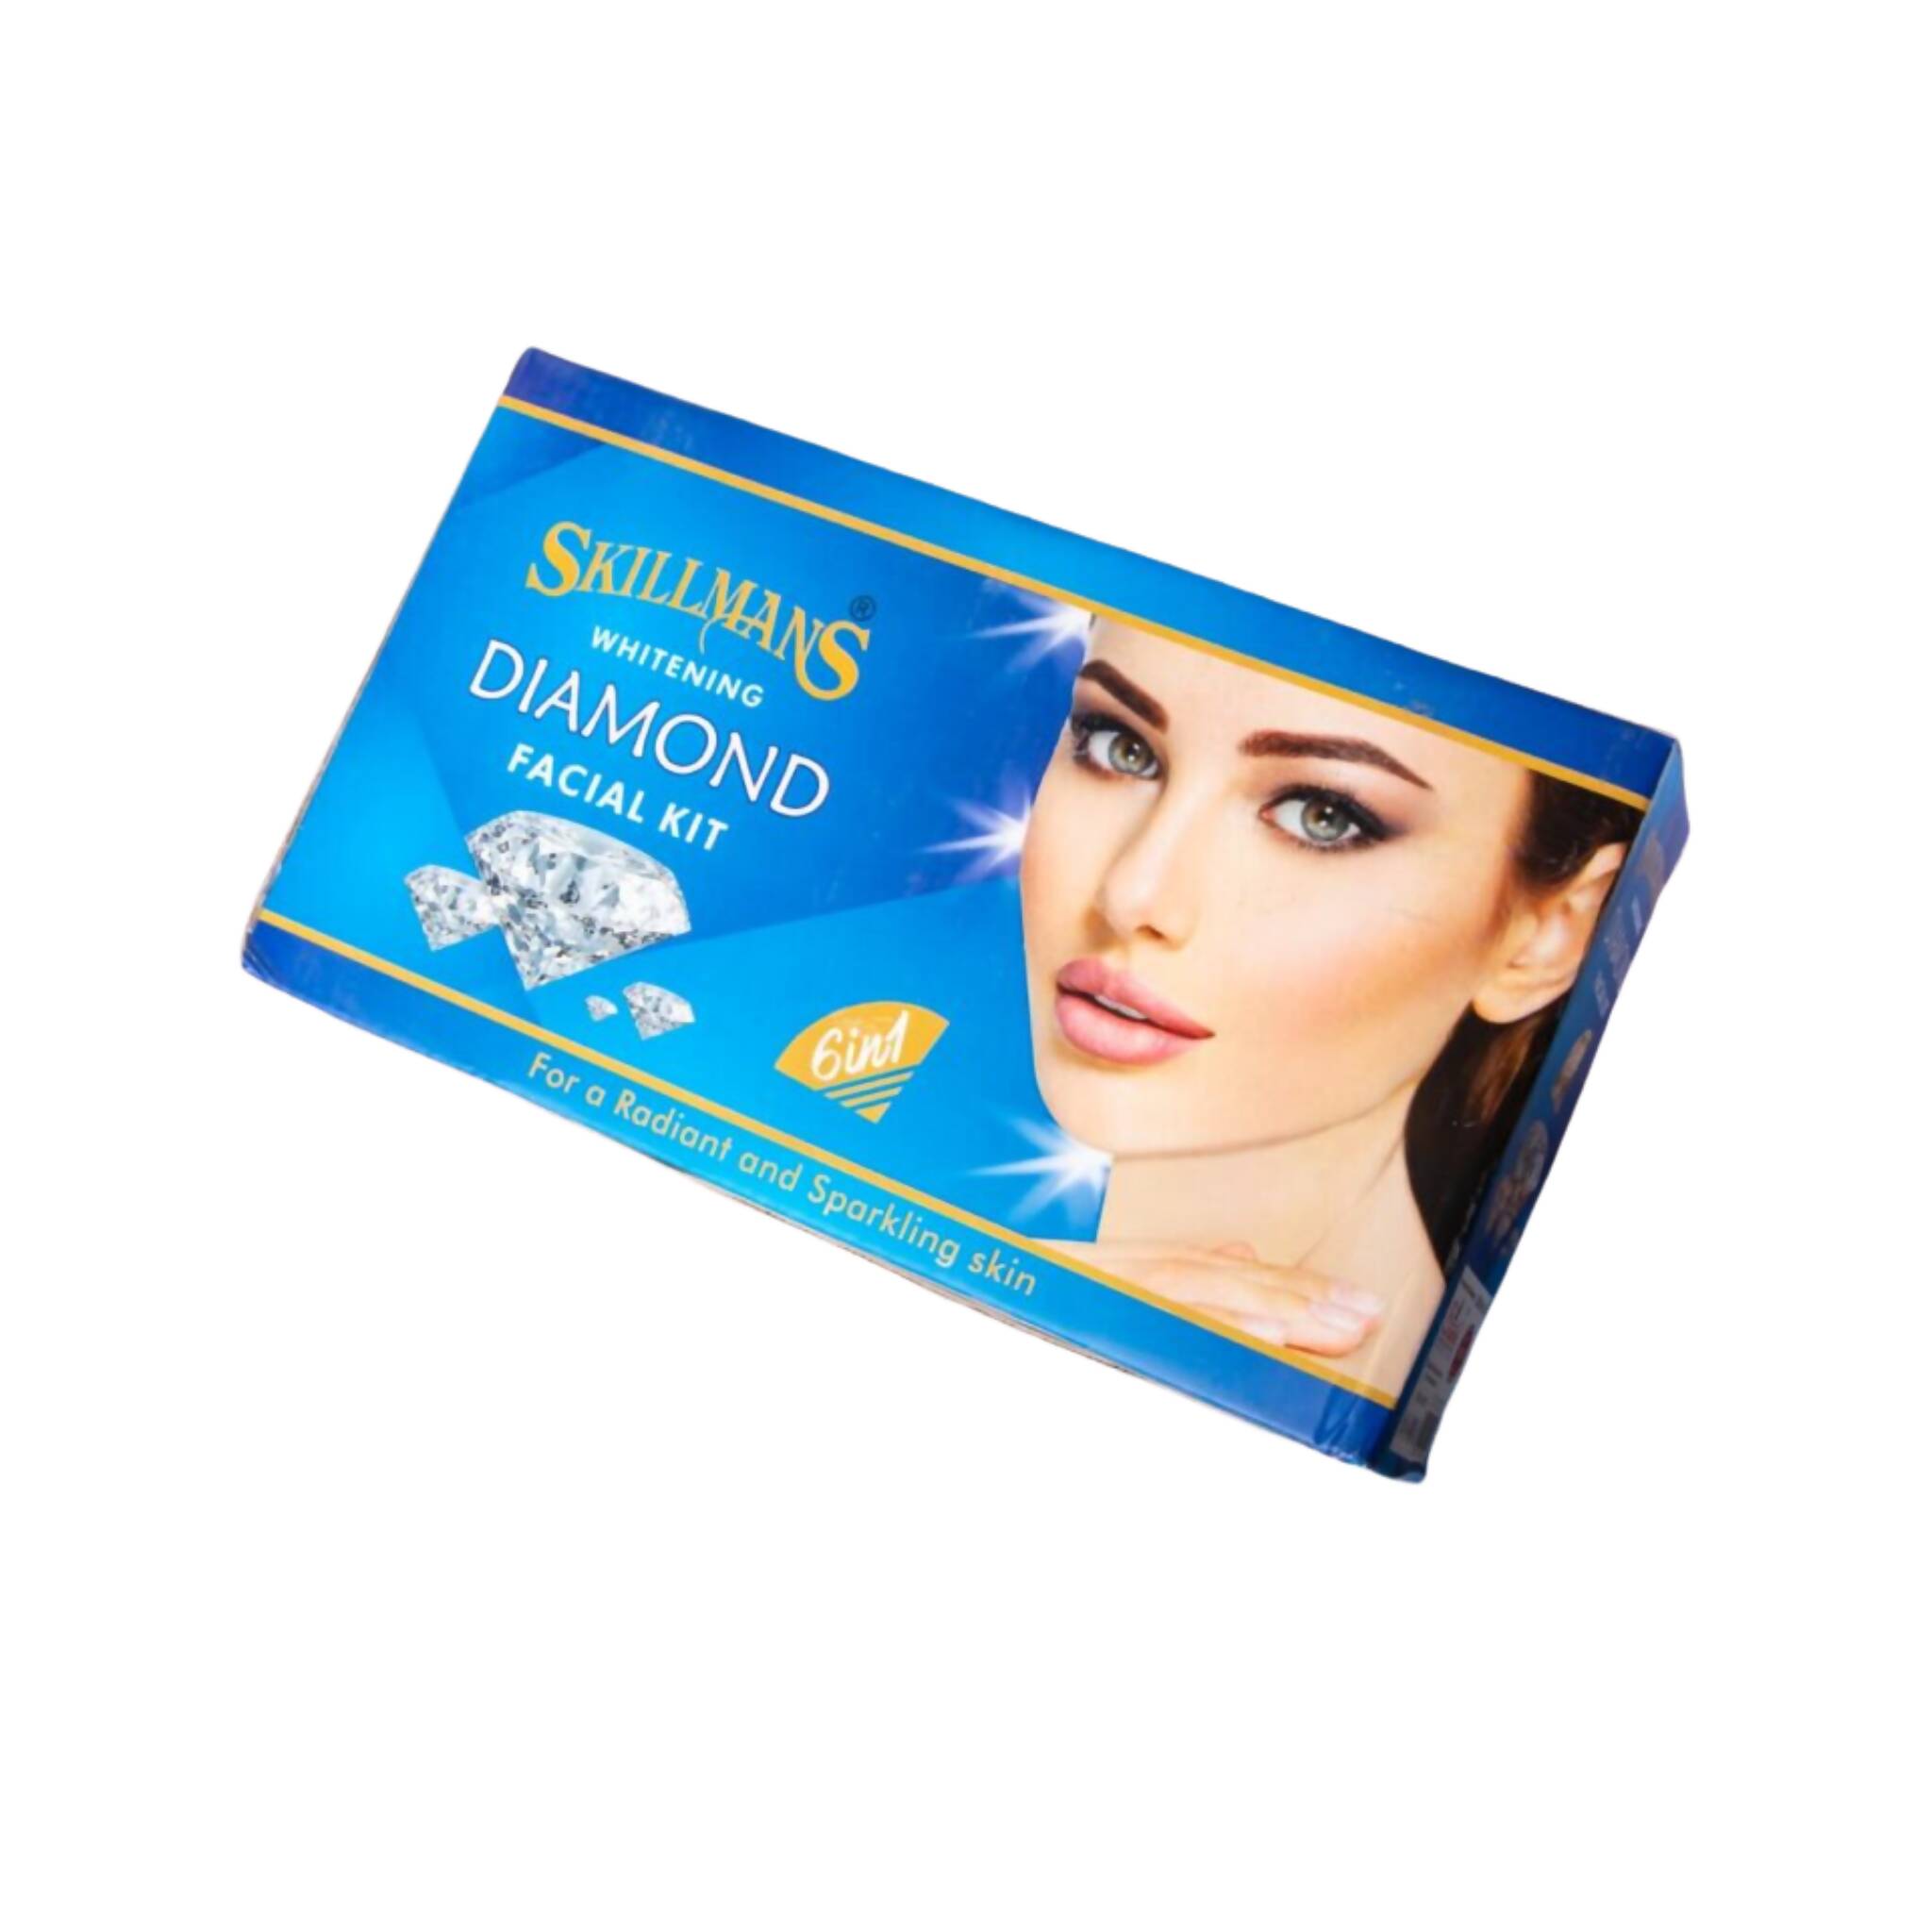 Facial Kit, Skillmans Whitening - Pack of 6, for Glowing Skin